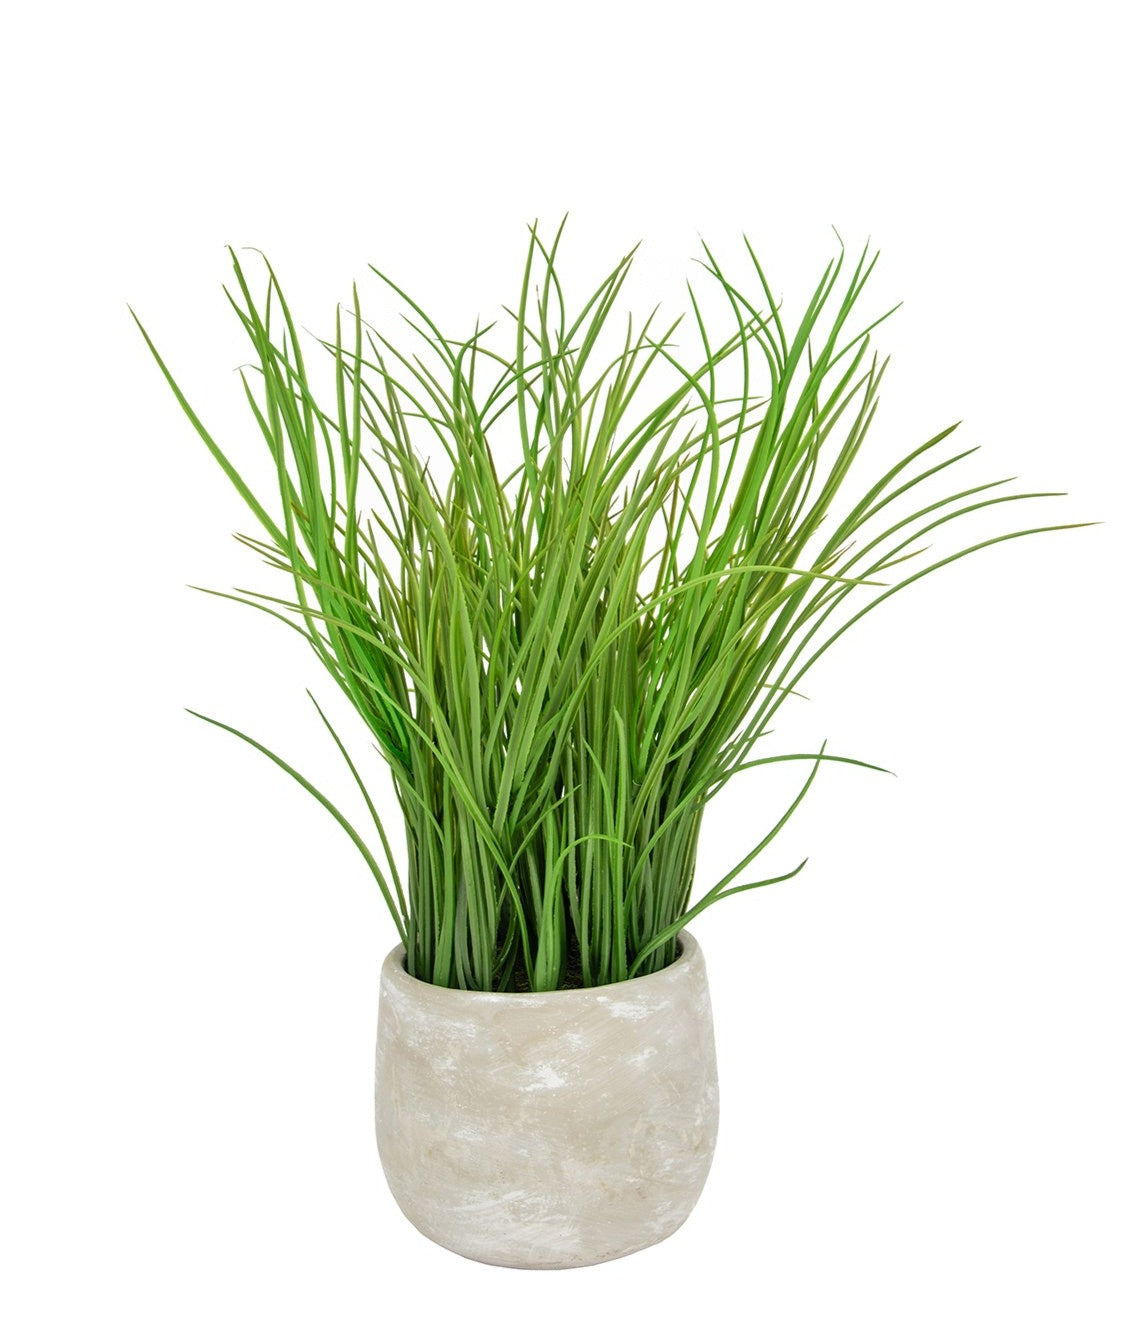 Artificial potted grass plant in grey pot